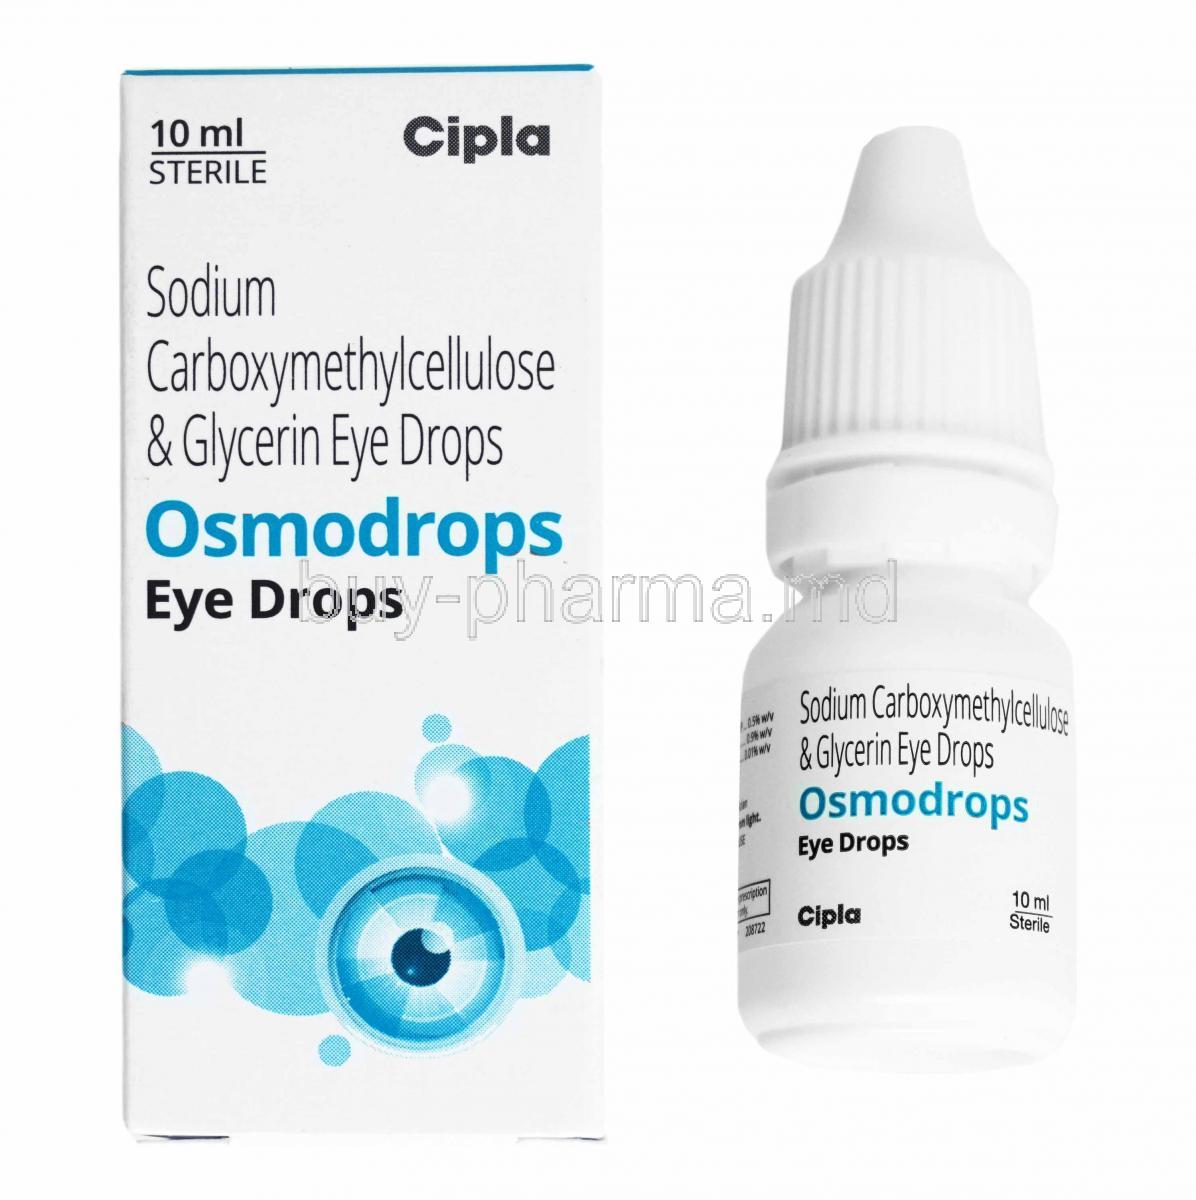 Osmodrops Eye Drop, Carboxymethylcellulose and Glycerin box and bottle